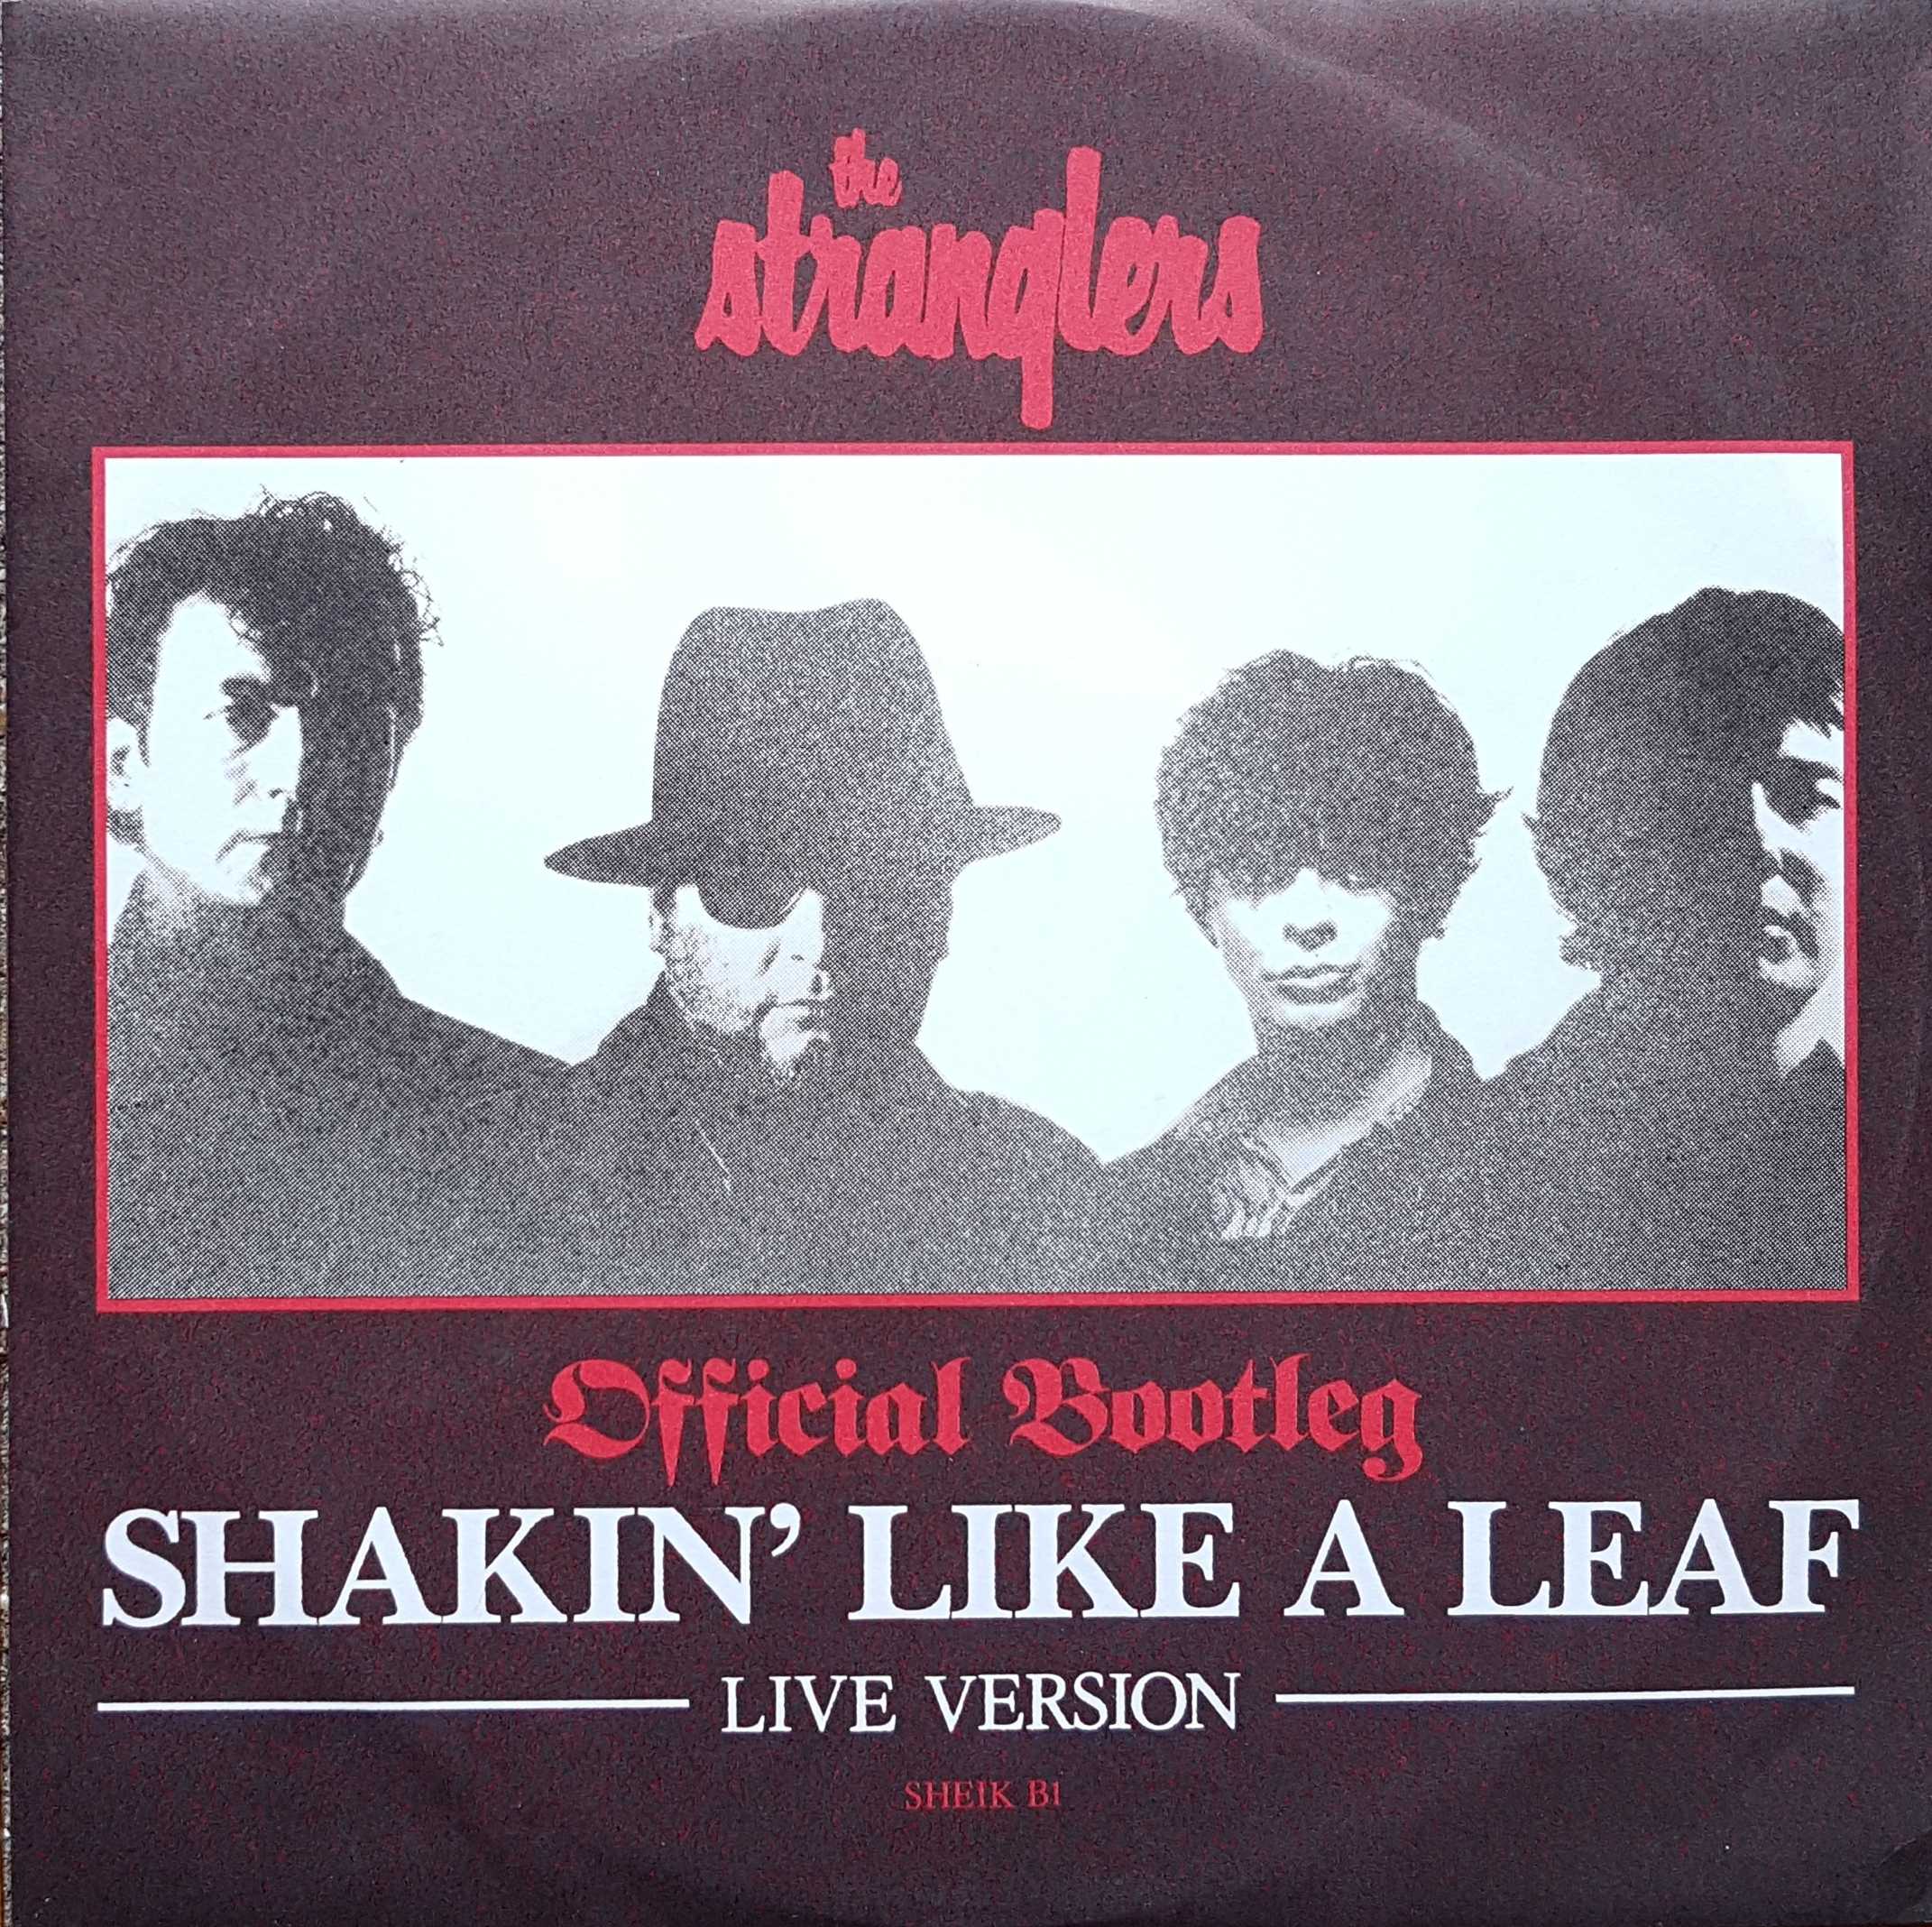 Picture of SHEIK B 1 Shakin' like a leaf by artist The Stranglers from The Stranglers